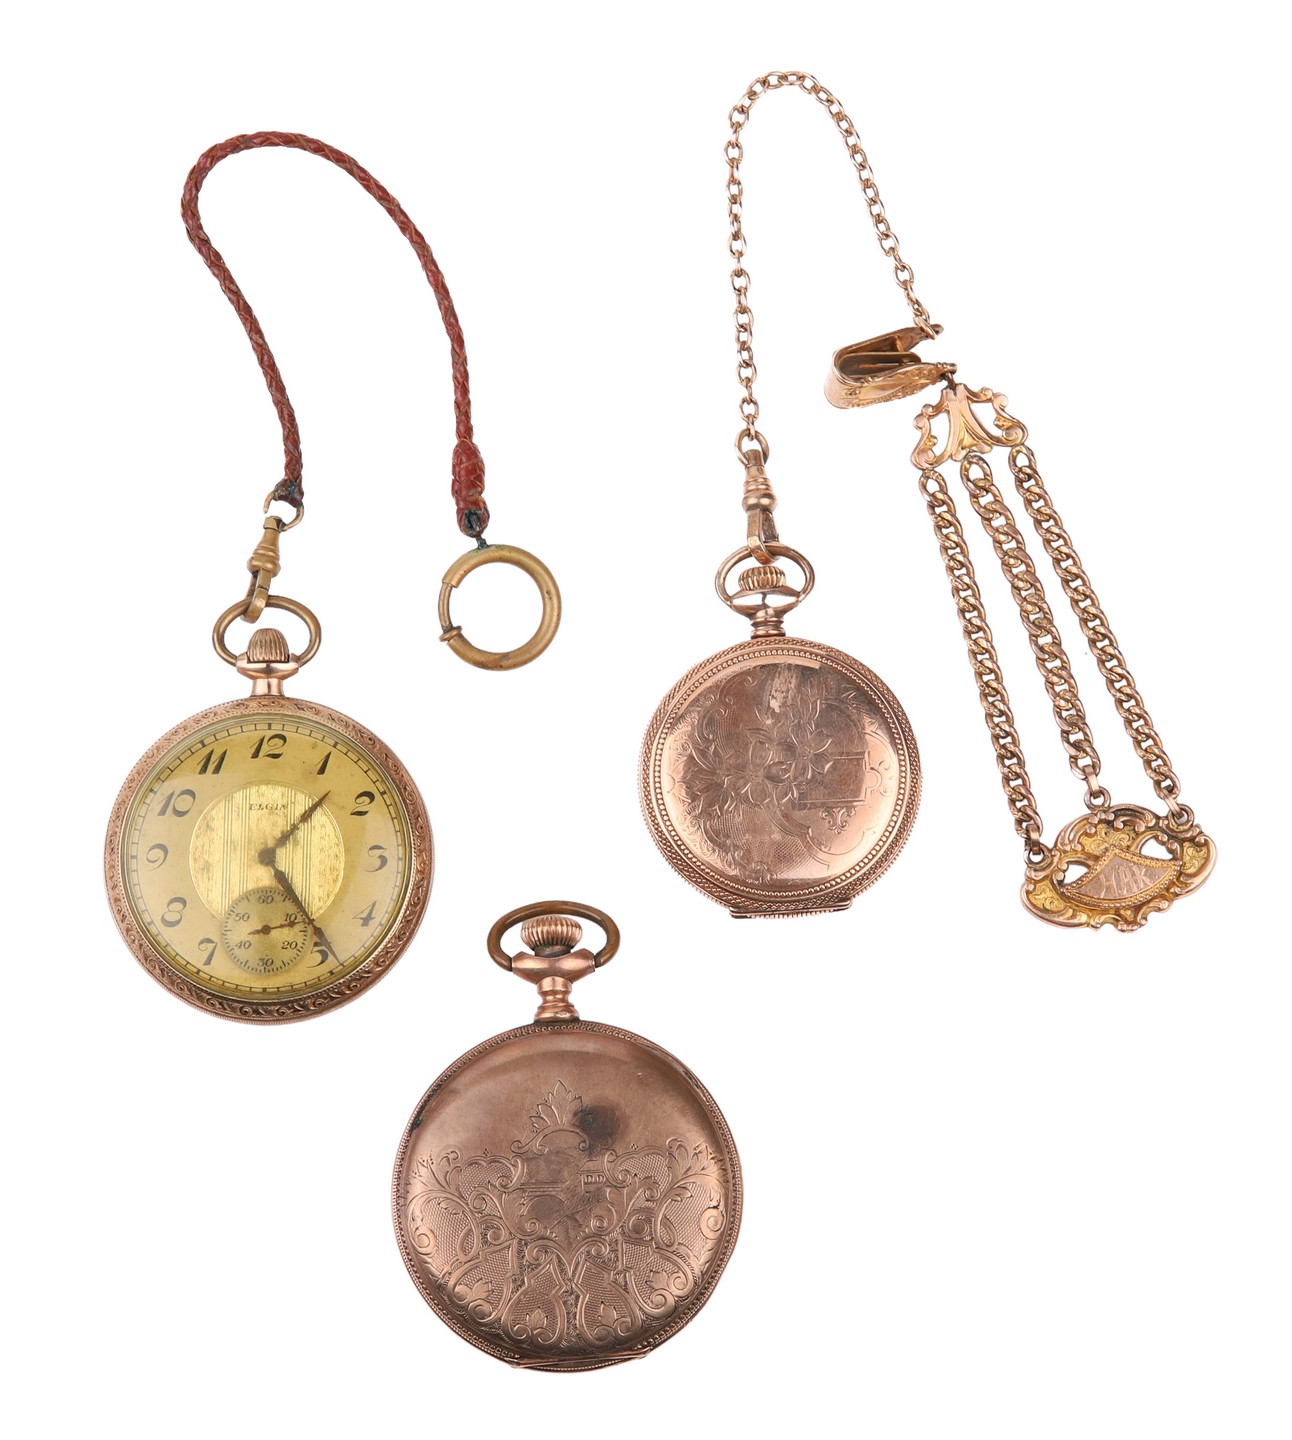  3 Gold filled pocket watches 27a5c4